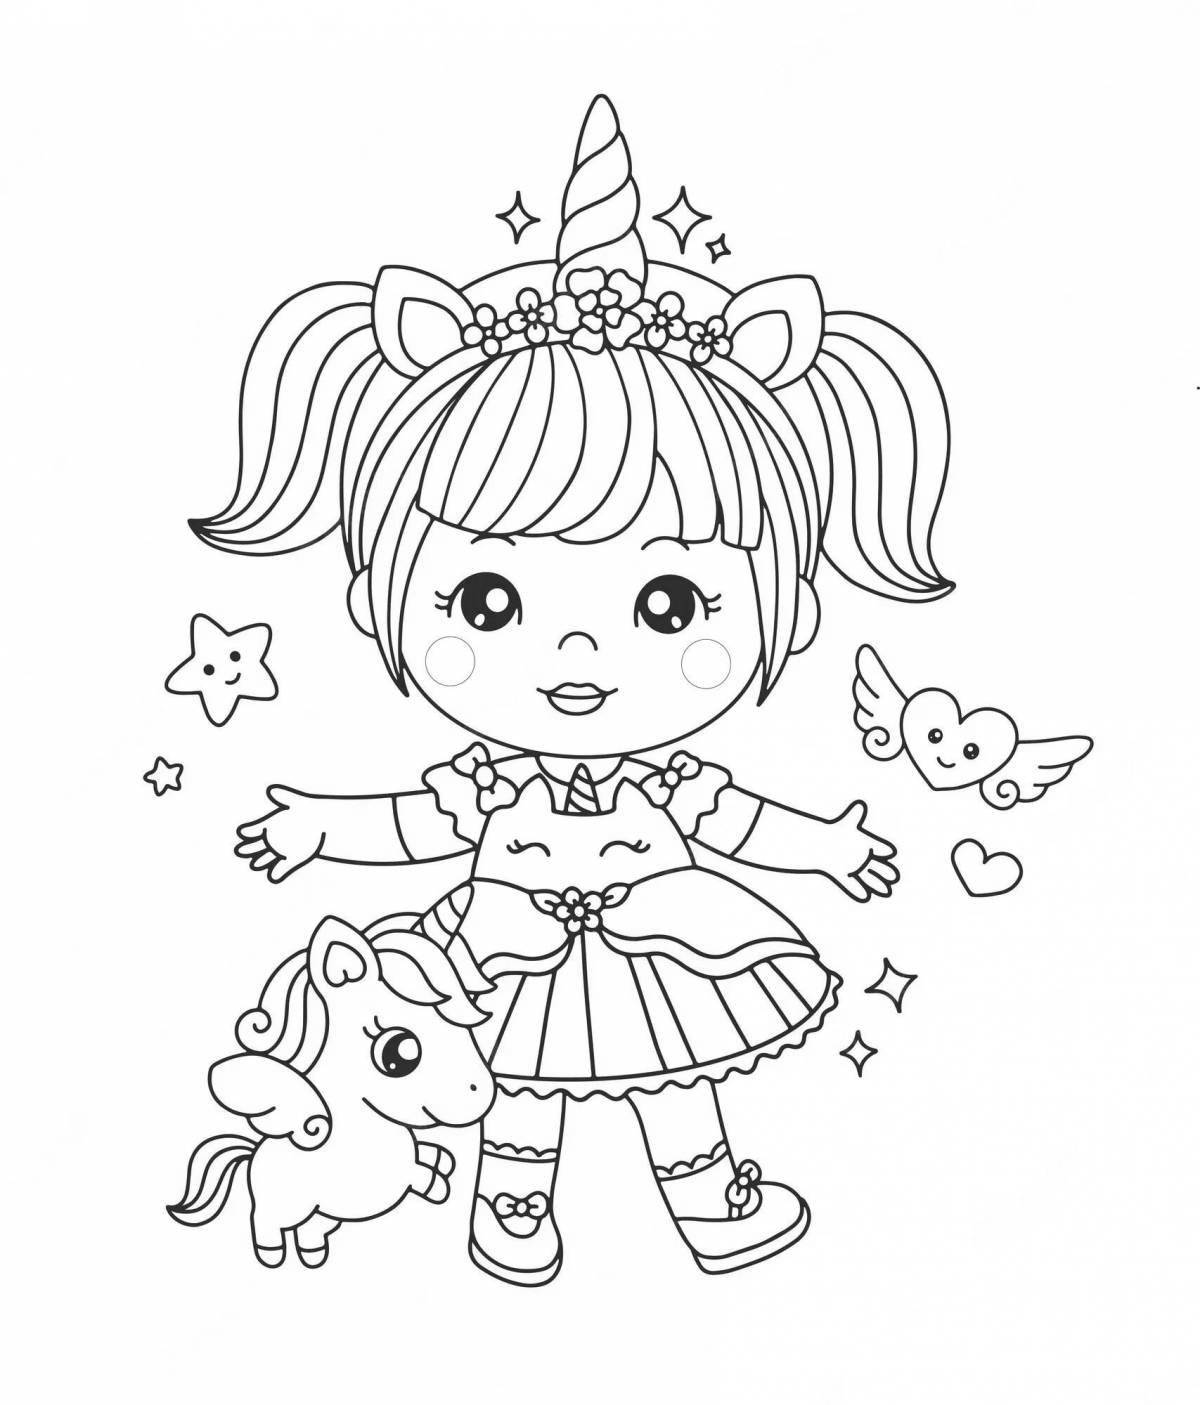 A fascinating coloring book of a girl dressed as a unicorn